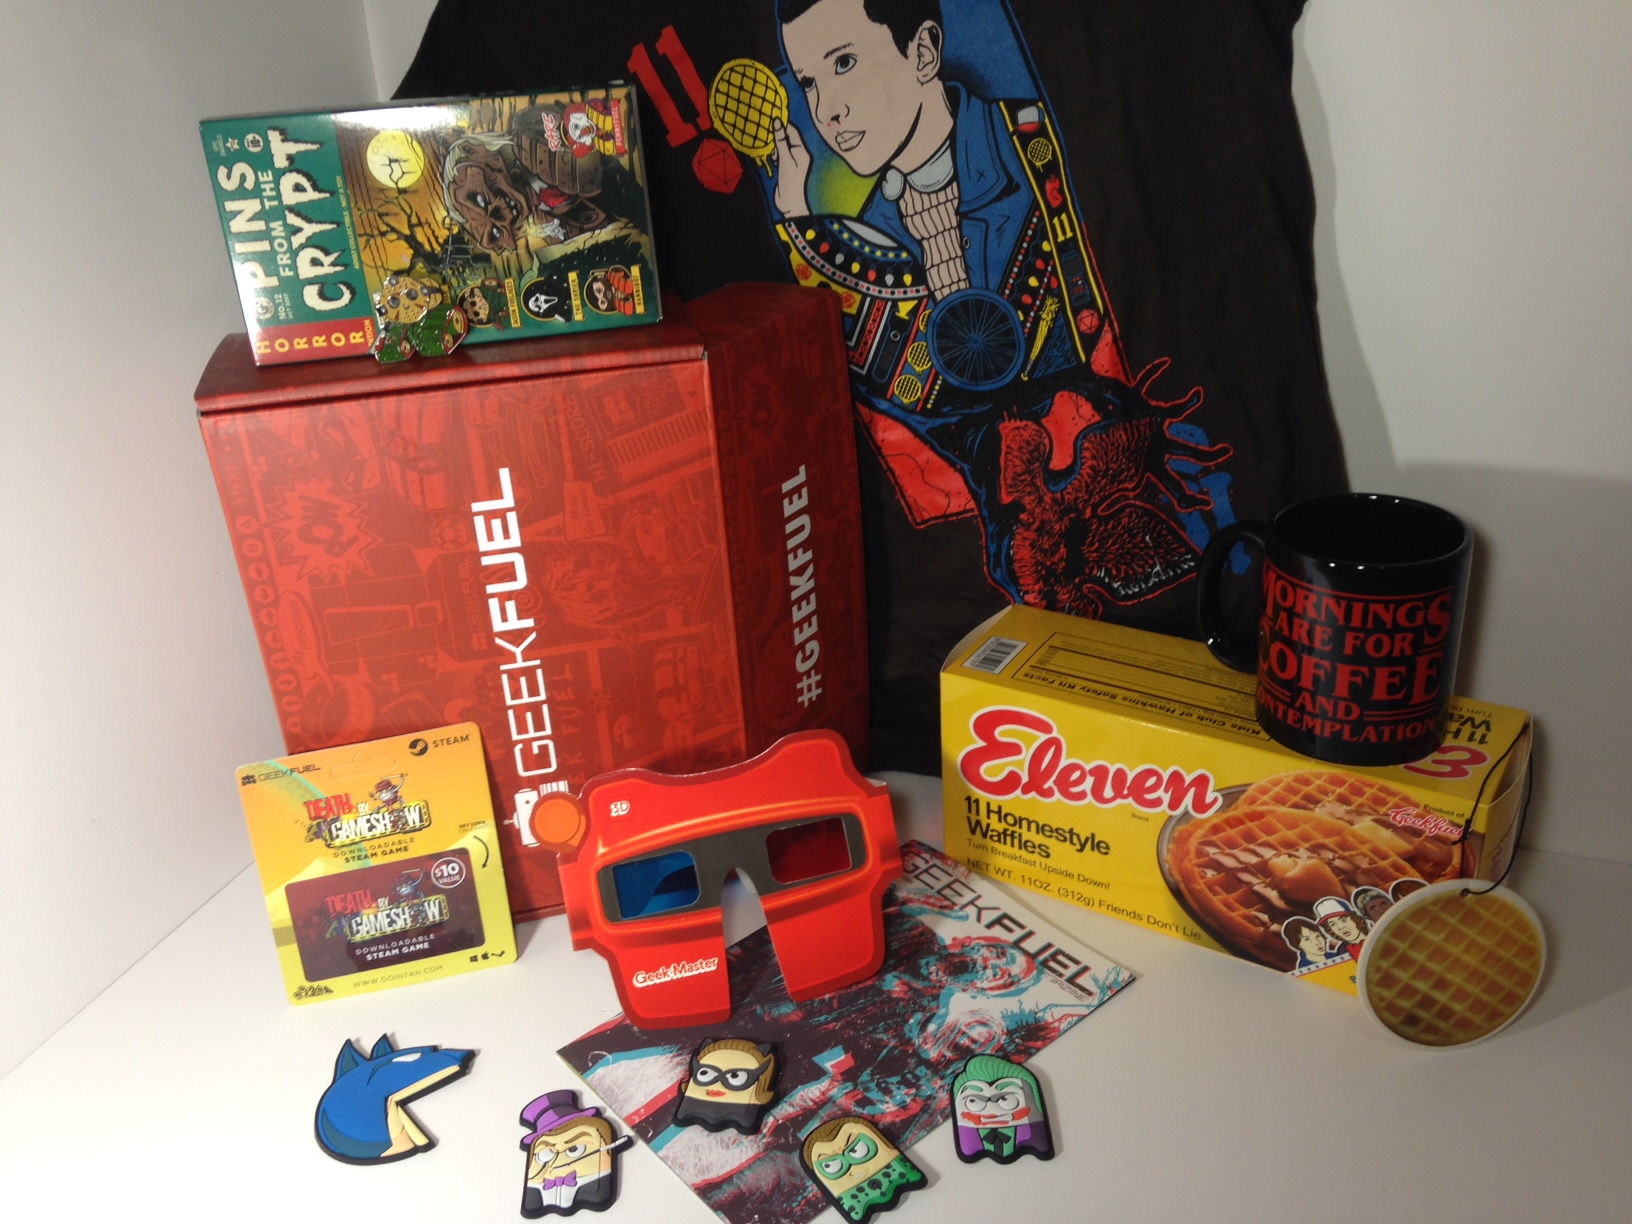 Geek insider, geekinsider, geekinsider. Com,, unboxing geek fuel's mystery box for october 2017 - get $3 off!! , culture, geek life